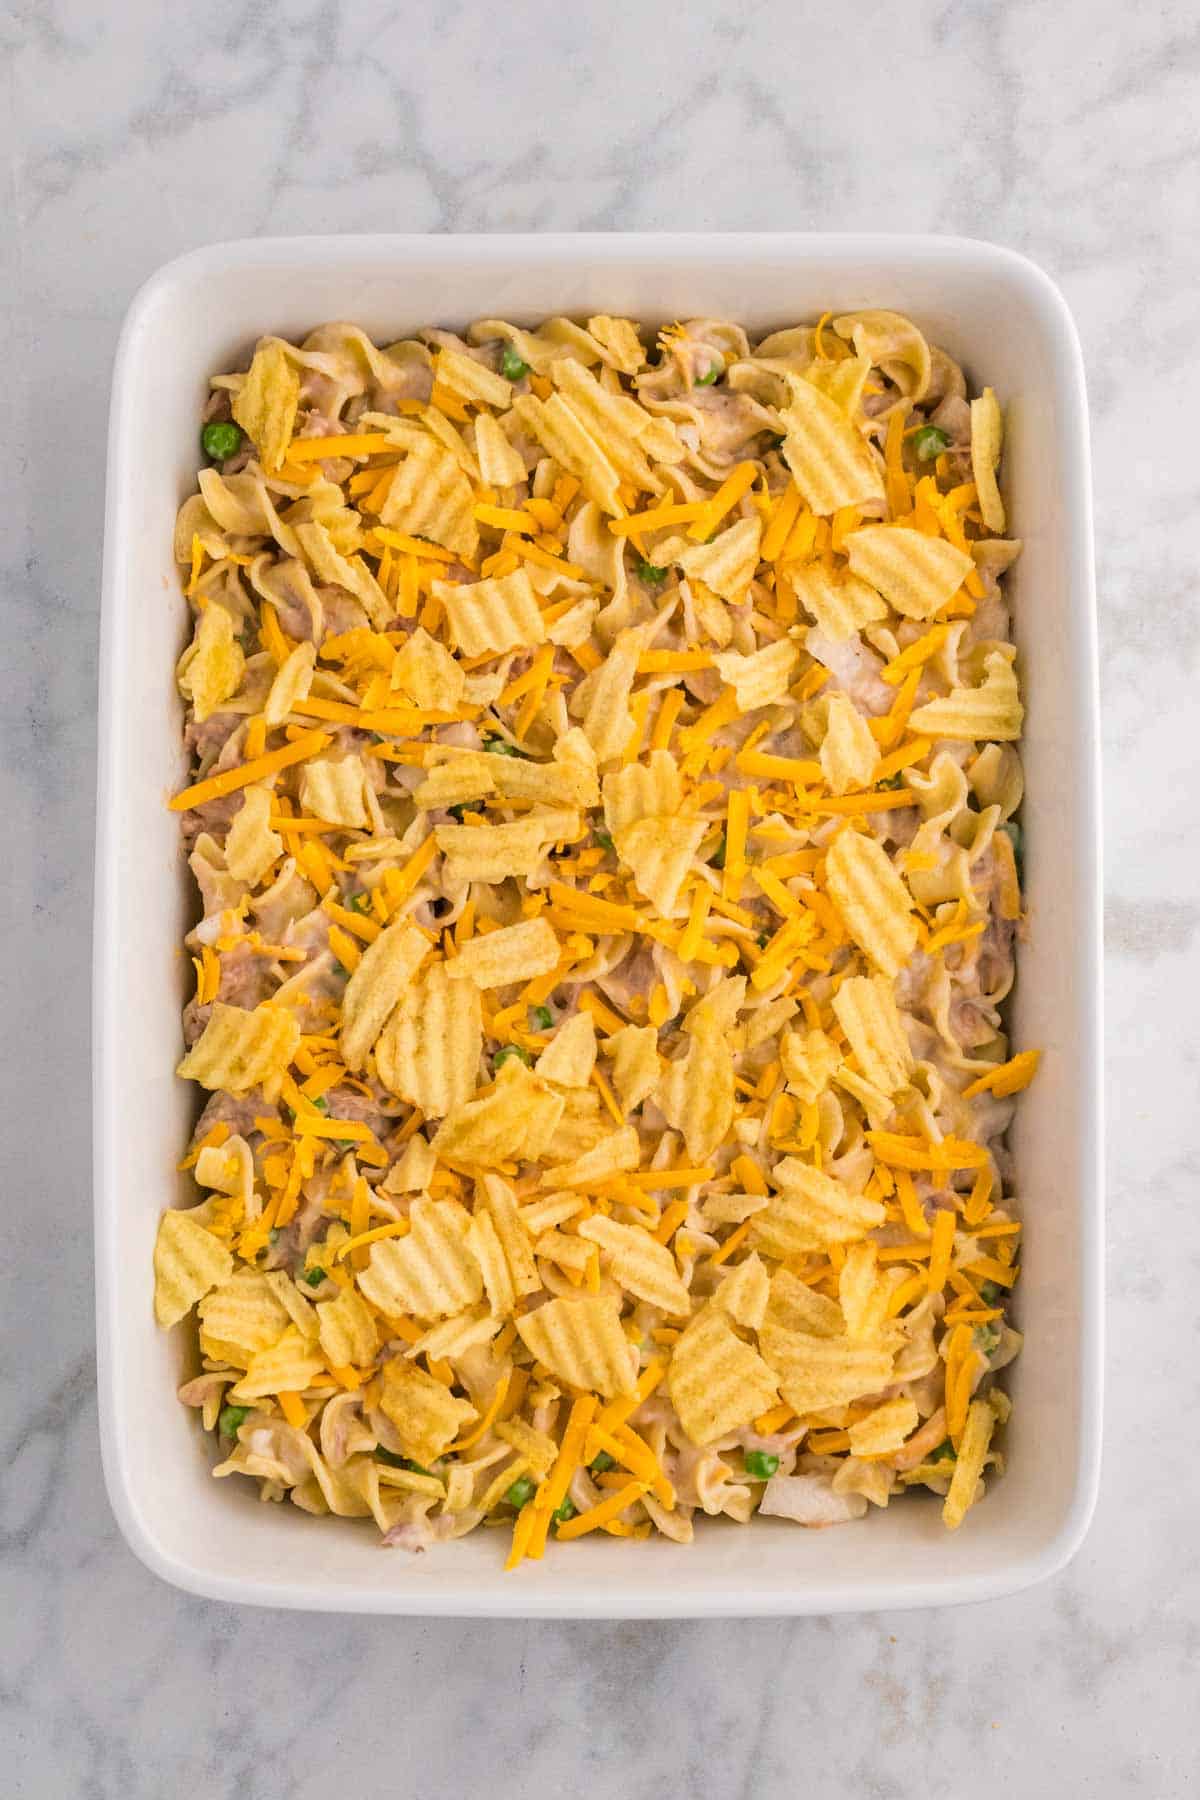 crushed potato chips and shredded cheddar cheese on top of tuna noodle casserole